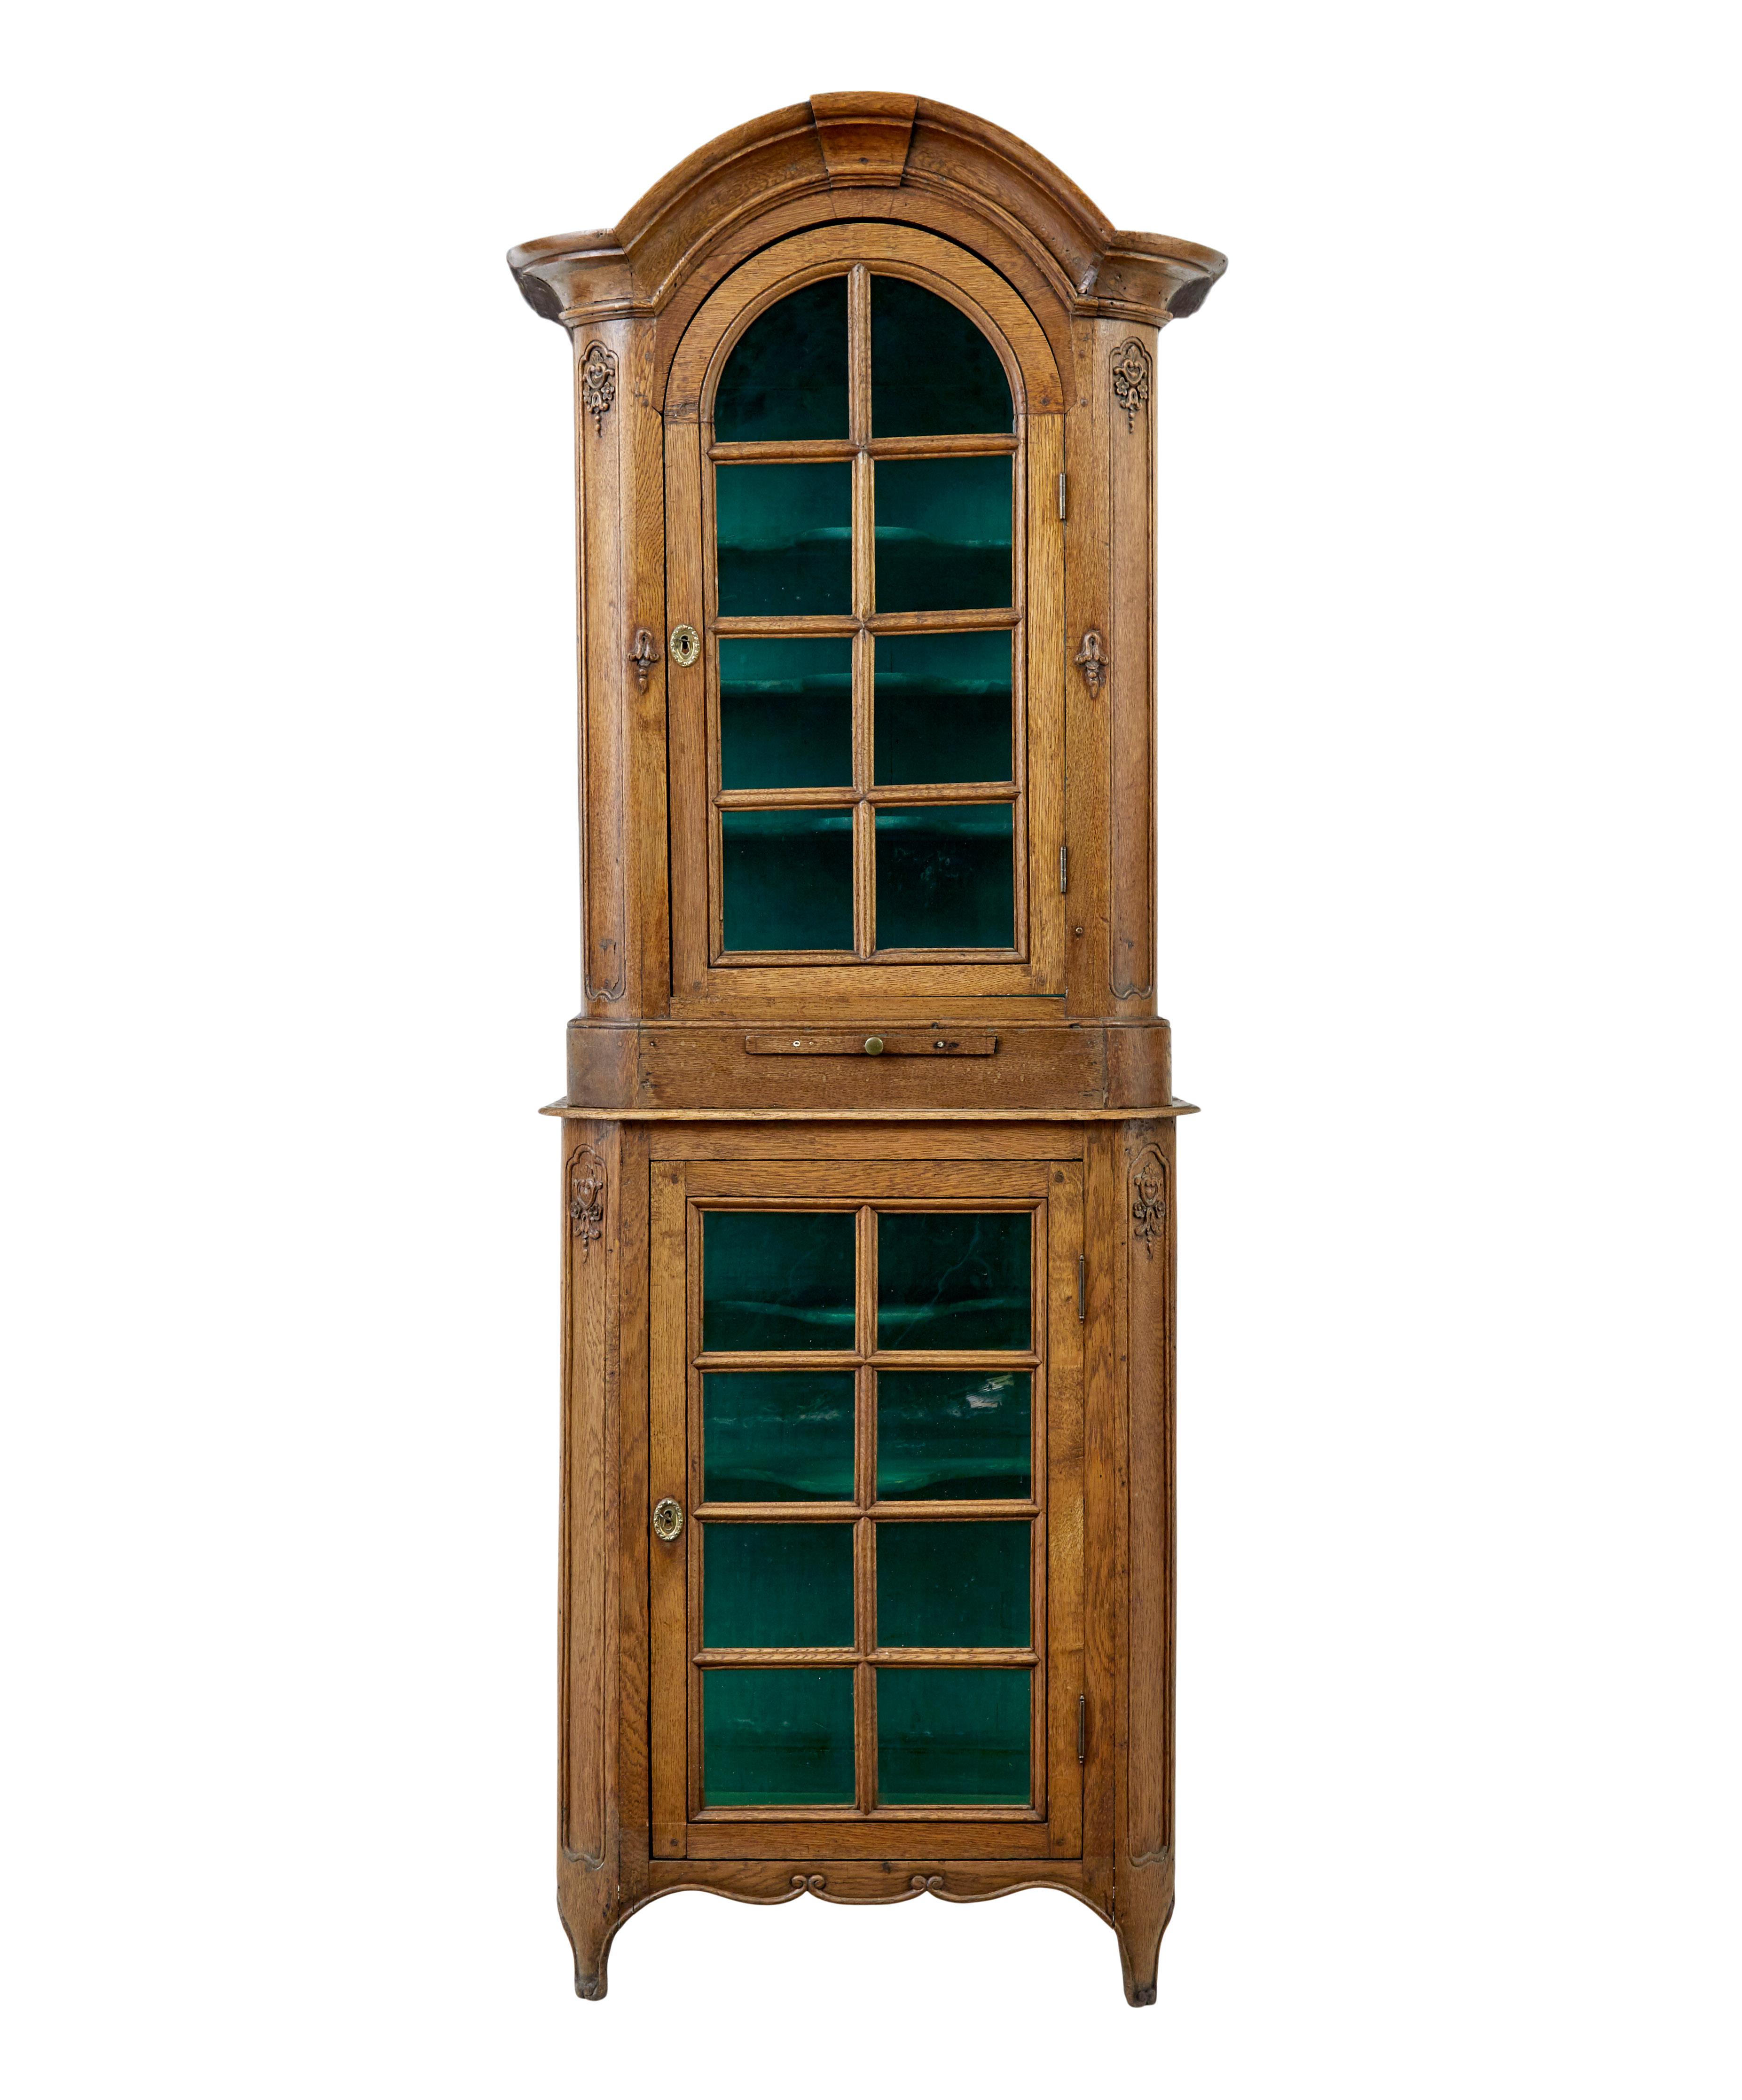 Mid 19th century glazed carved oak liege cabinet circa 1860.

Beautiful 2 piece liege cabinet from Belgium presented in oak, original green coloured glass and contrasting painted interior.

Top section with carved architectural cornice, rounded